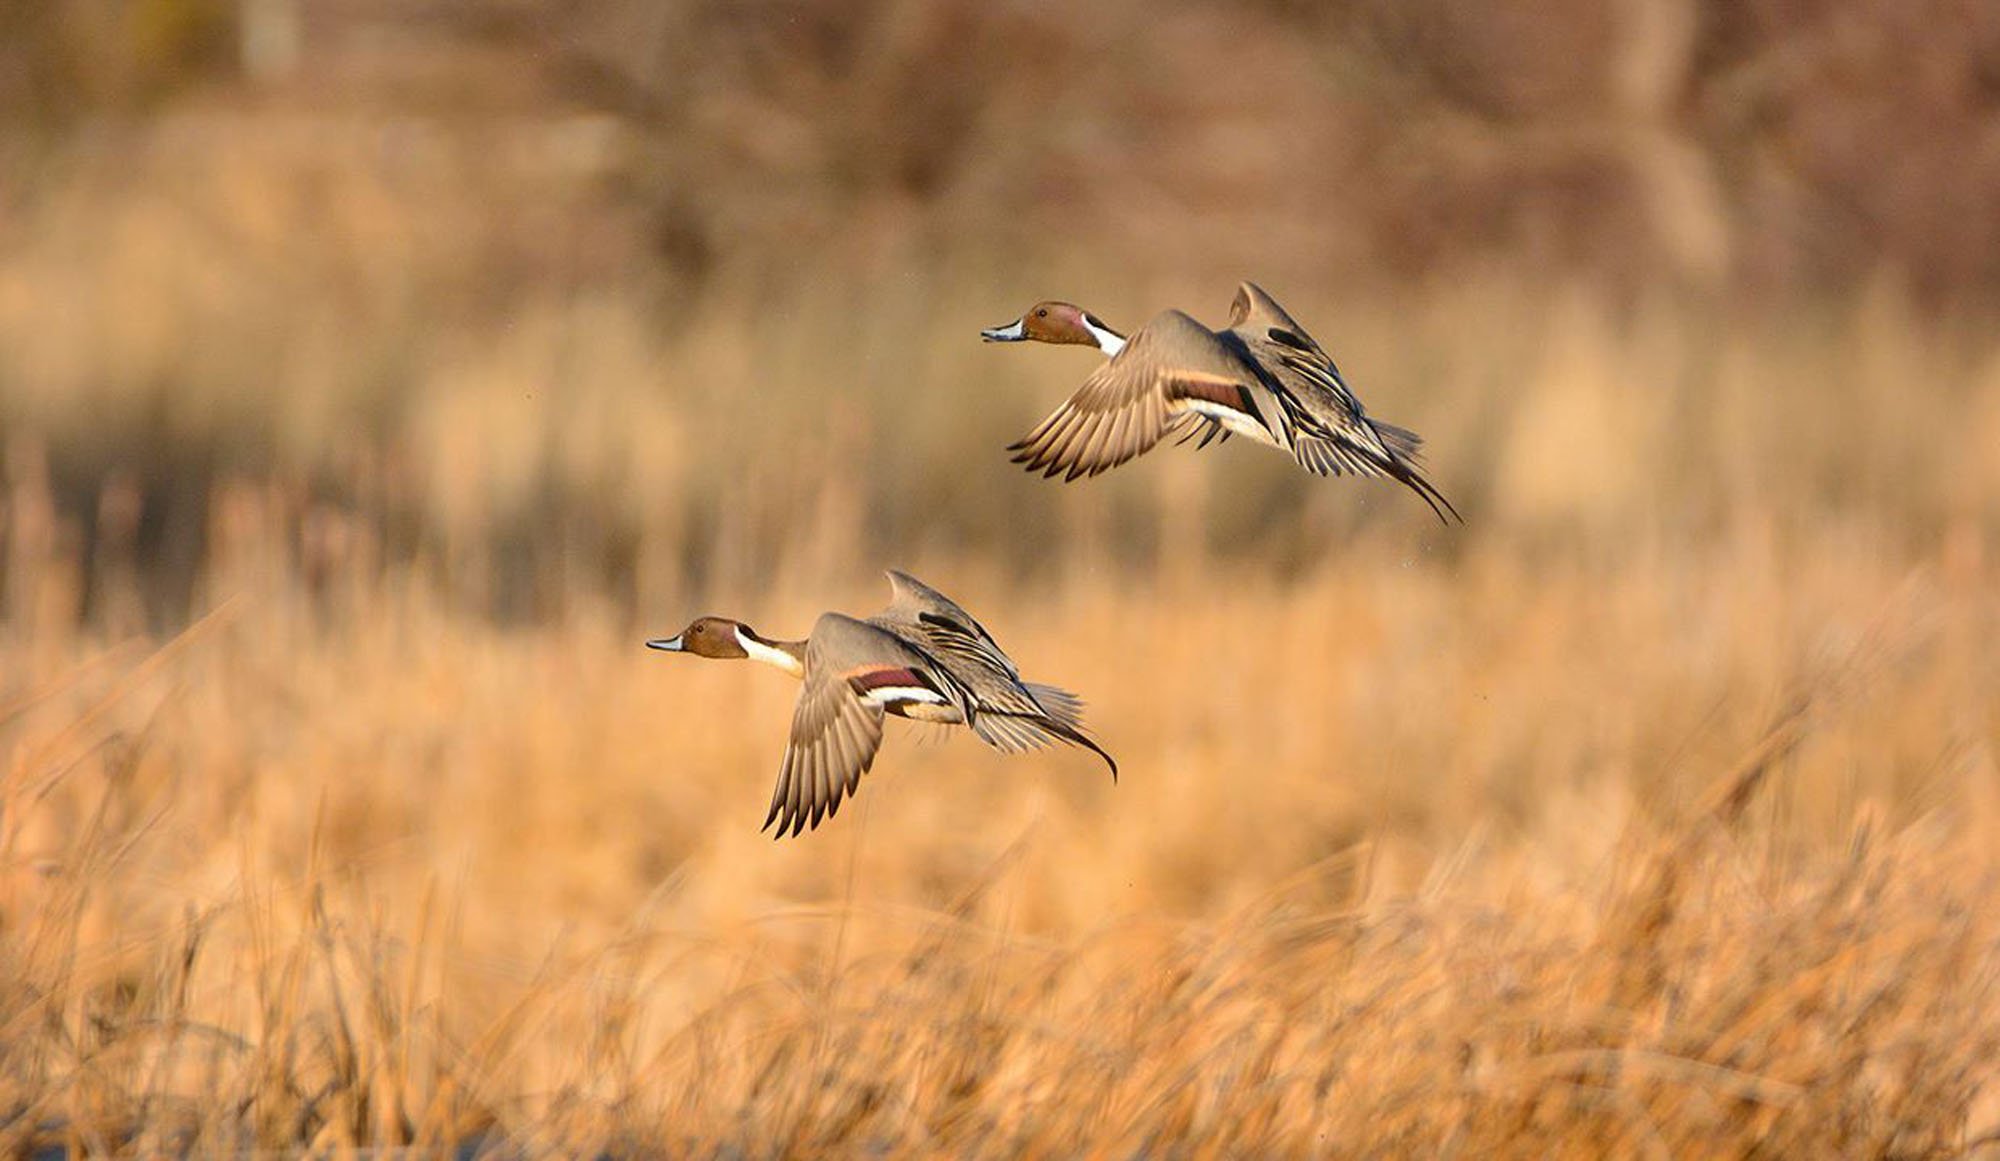 Two pintail ducks in flight in bright sunlight over a grassy area